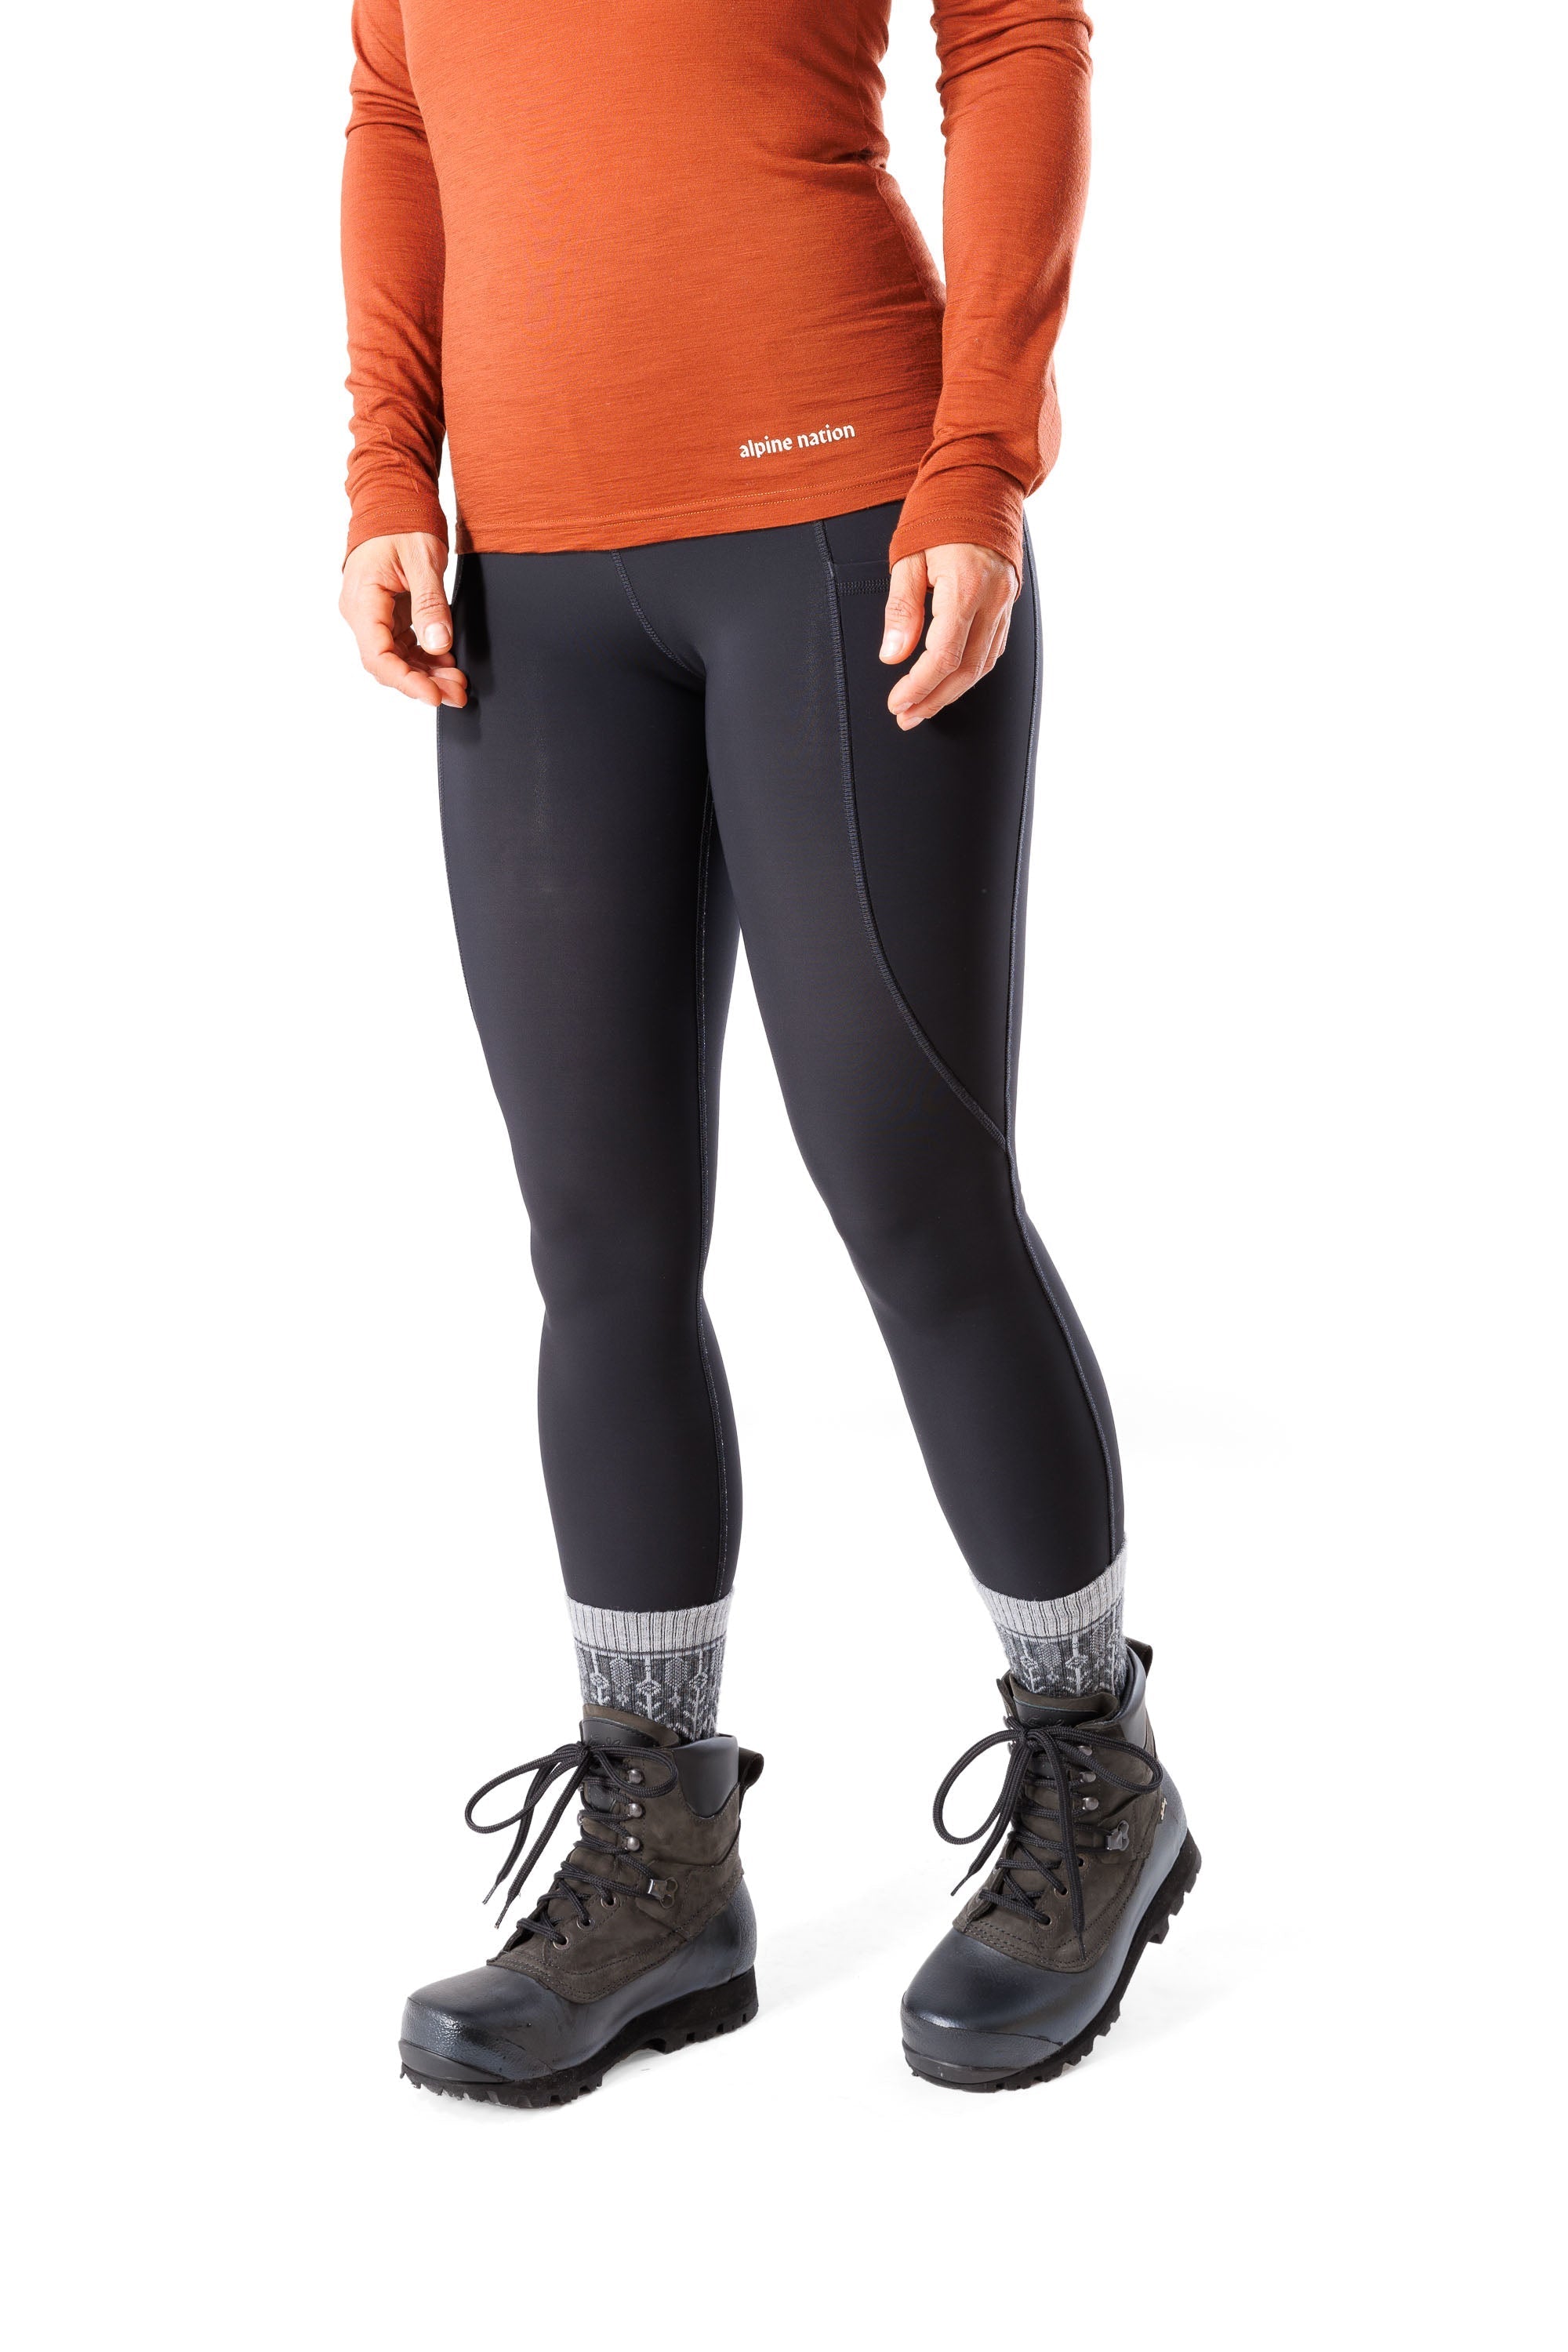 Pro Winter Pocket Leggings Eclipse Tall (+7cm) – Alpine Nation Outdoor  Clothing